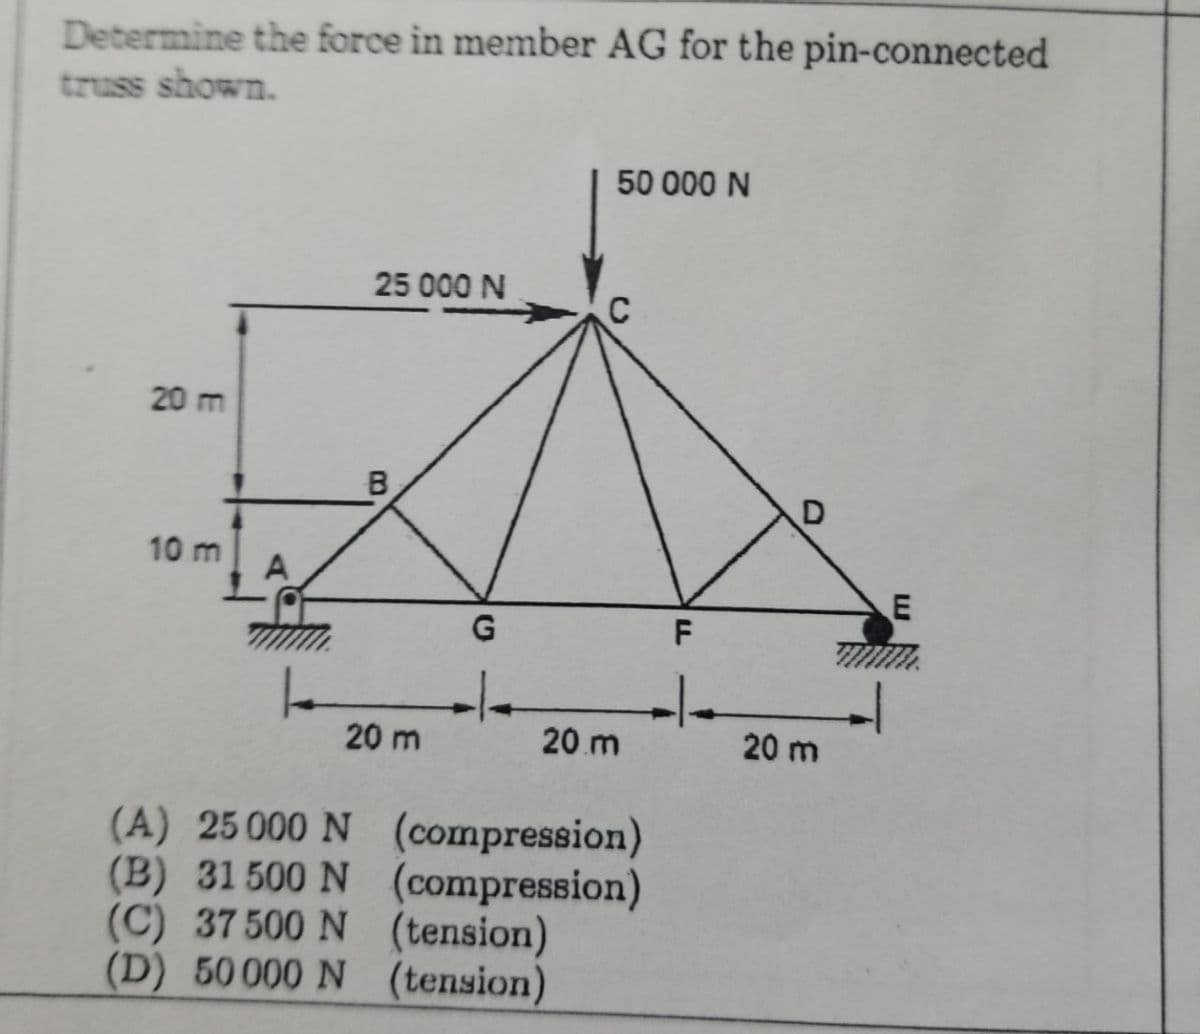 Determine the force in member AG for the pin-connected
truss shown.
50 000 N
25 000 N
C
20 m
B
10 m
A
-/-
20 m
20 m
20 m
(A) 25 000 N
(B) 31 500 N (compression)
(C) 37 500 N (tension)
(D) 50000 N (tension)
(compression)
